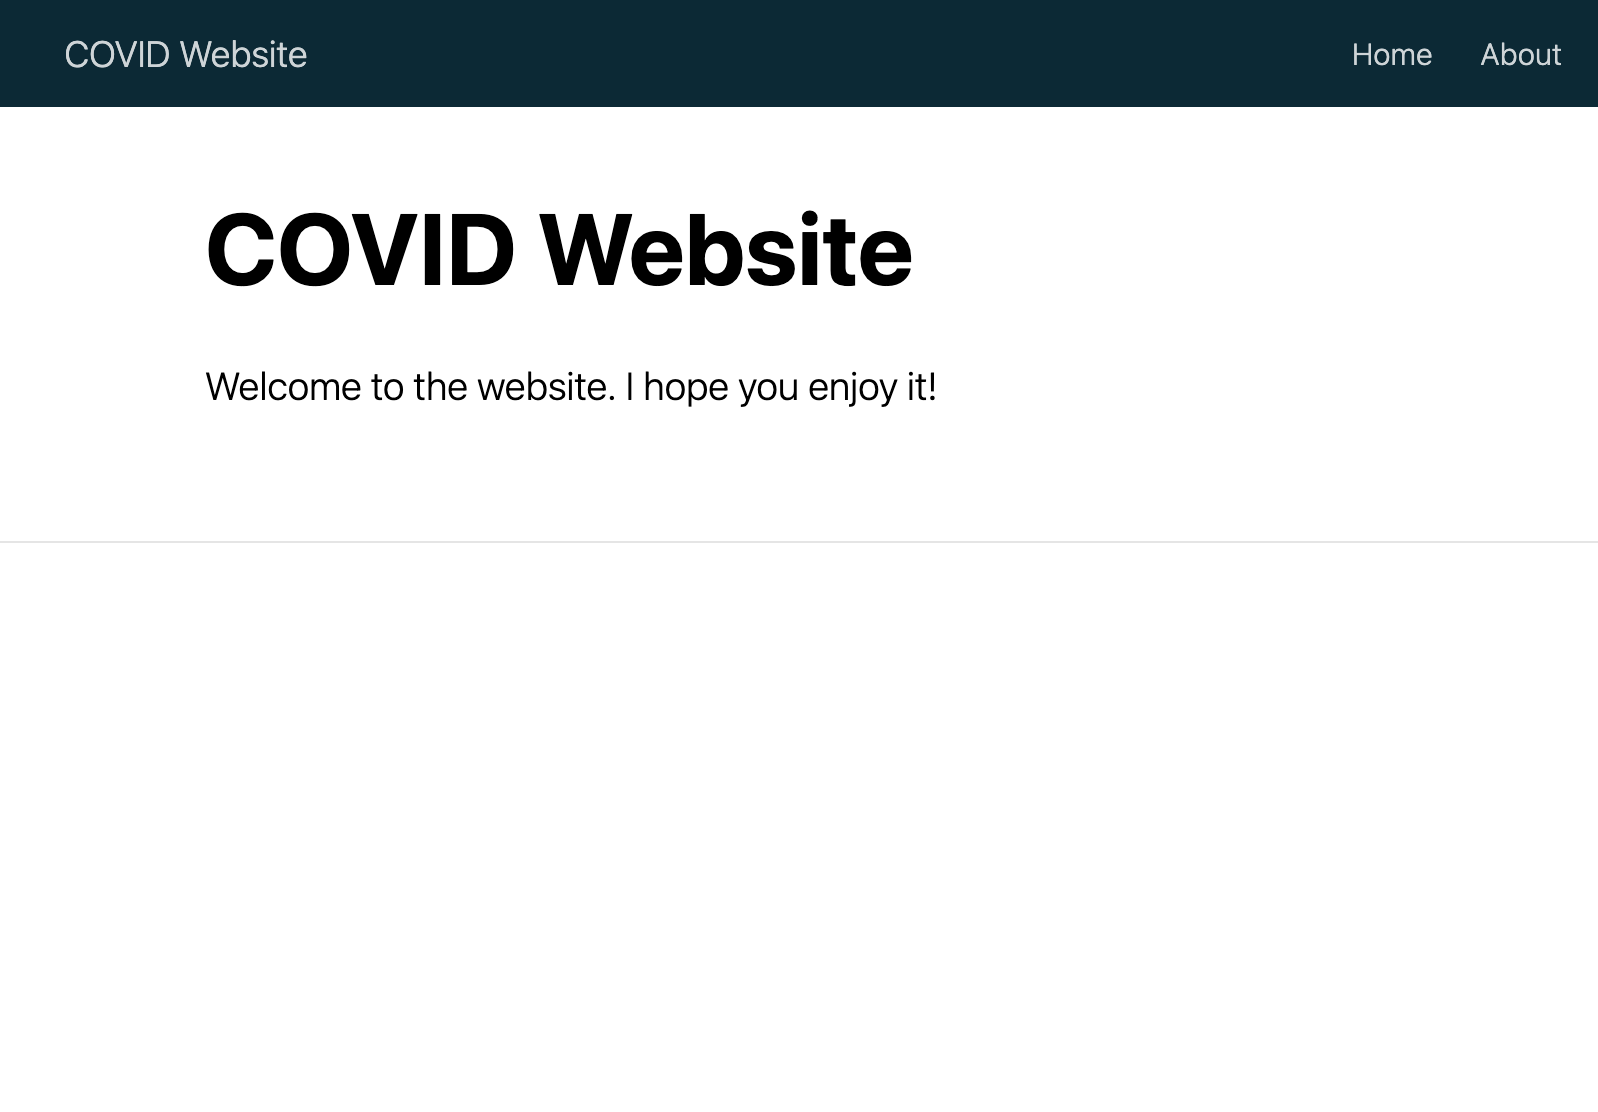 The COVID website with default content